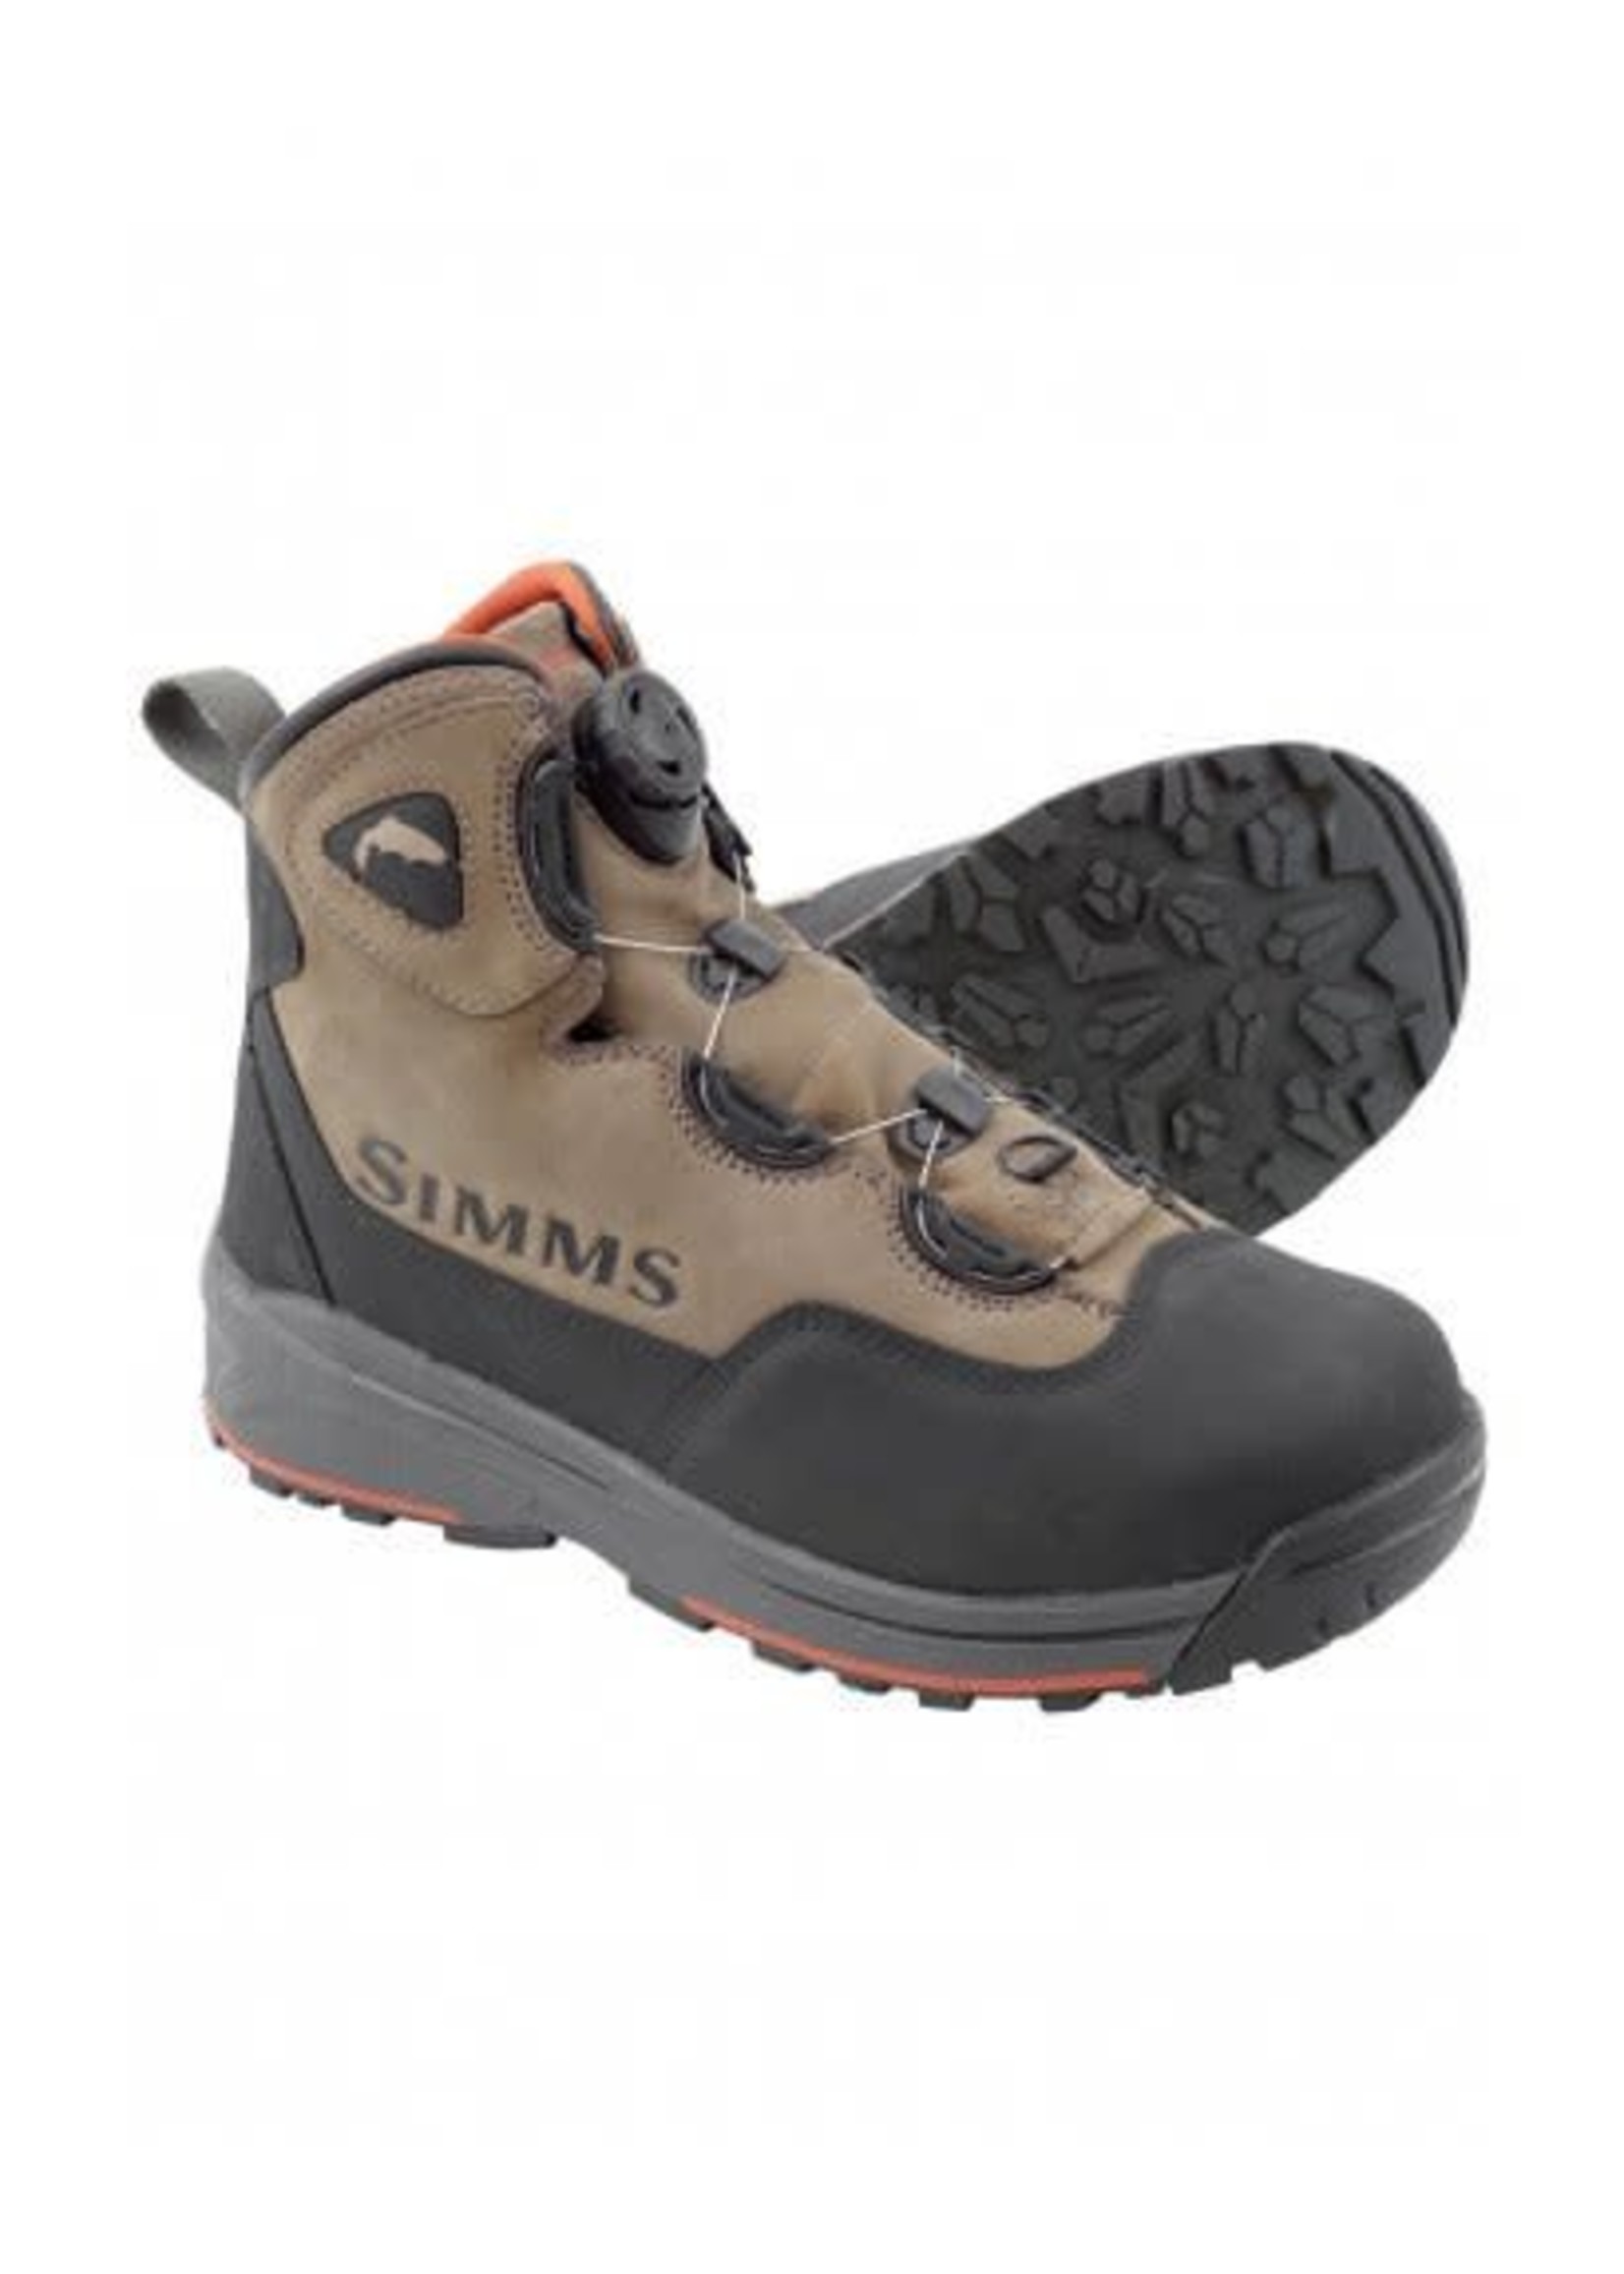 Simms Simms Men's Headwaters Boa Wading Boot - Vibram Sole